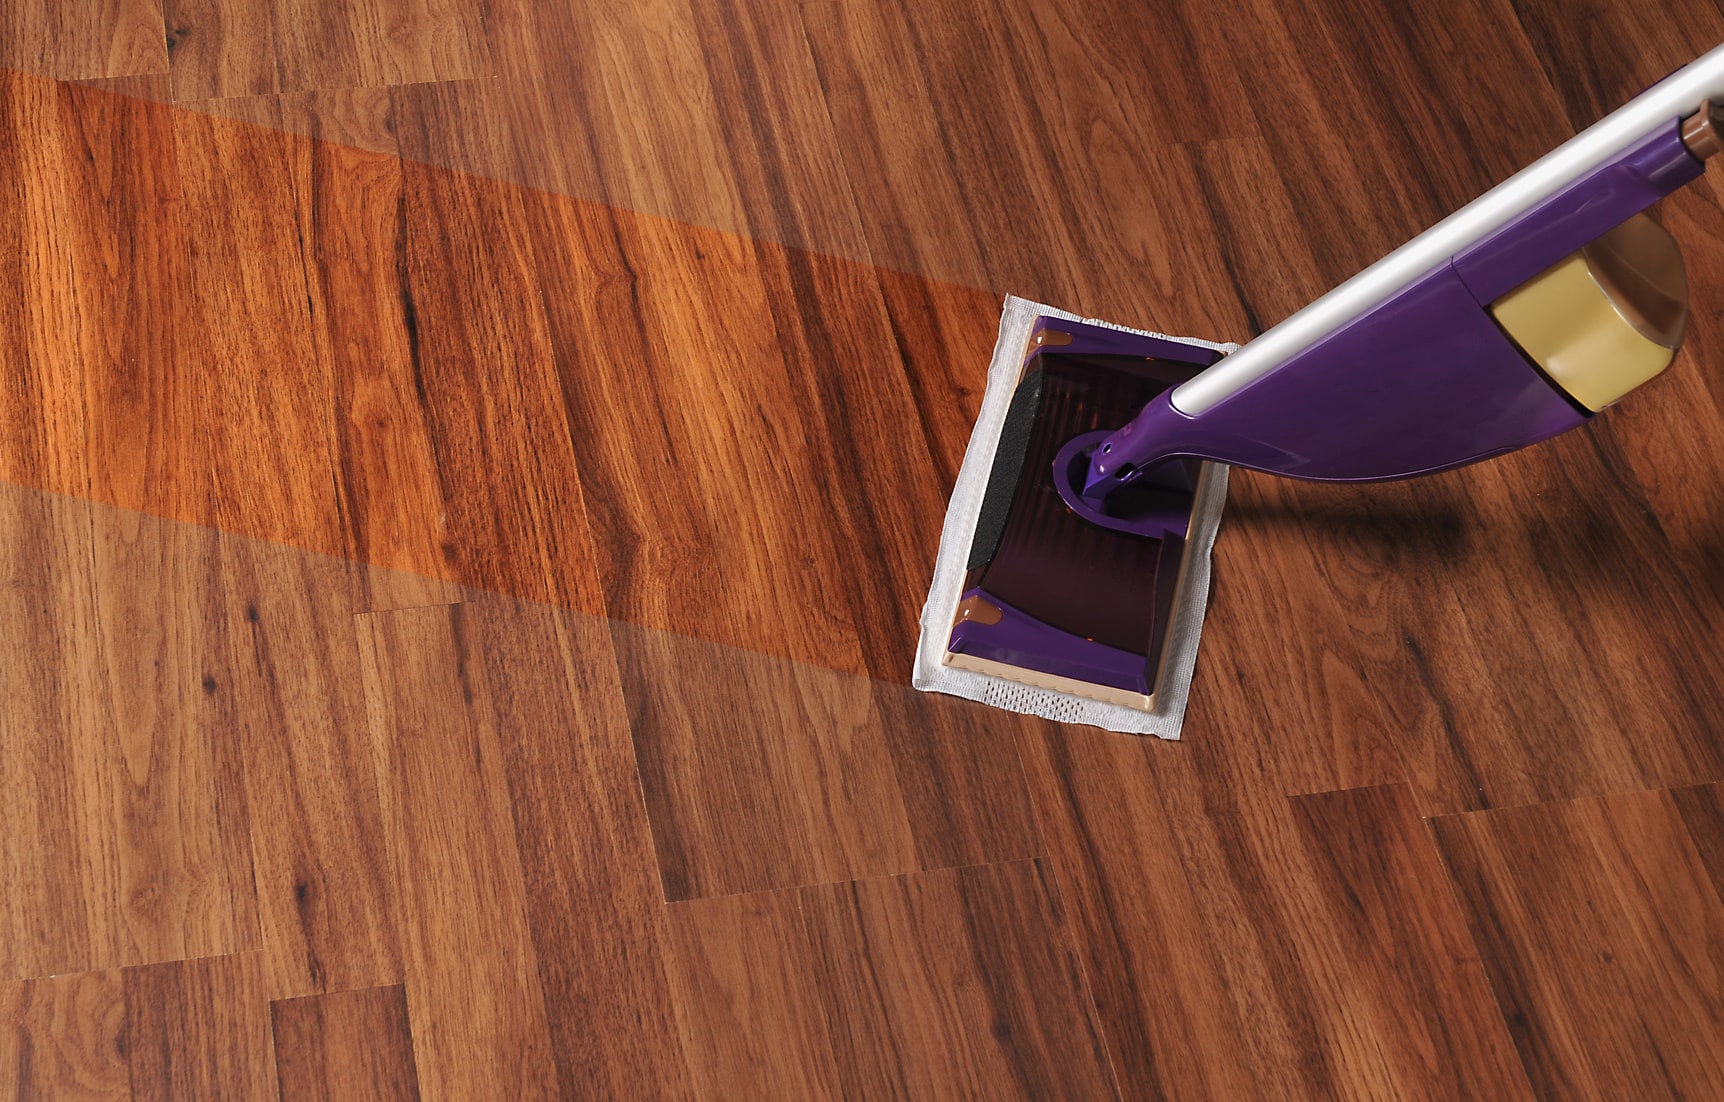 Make Your Own Wet And Dry Mops Using, Wet Mop For Hardwood Floors